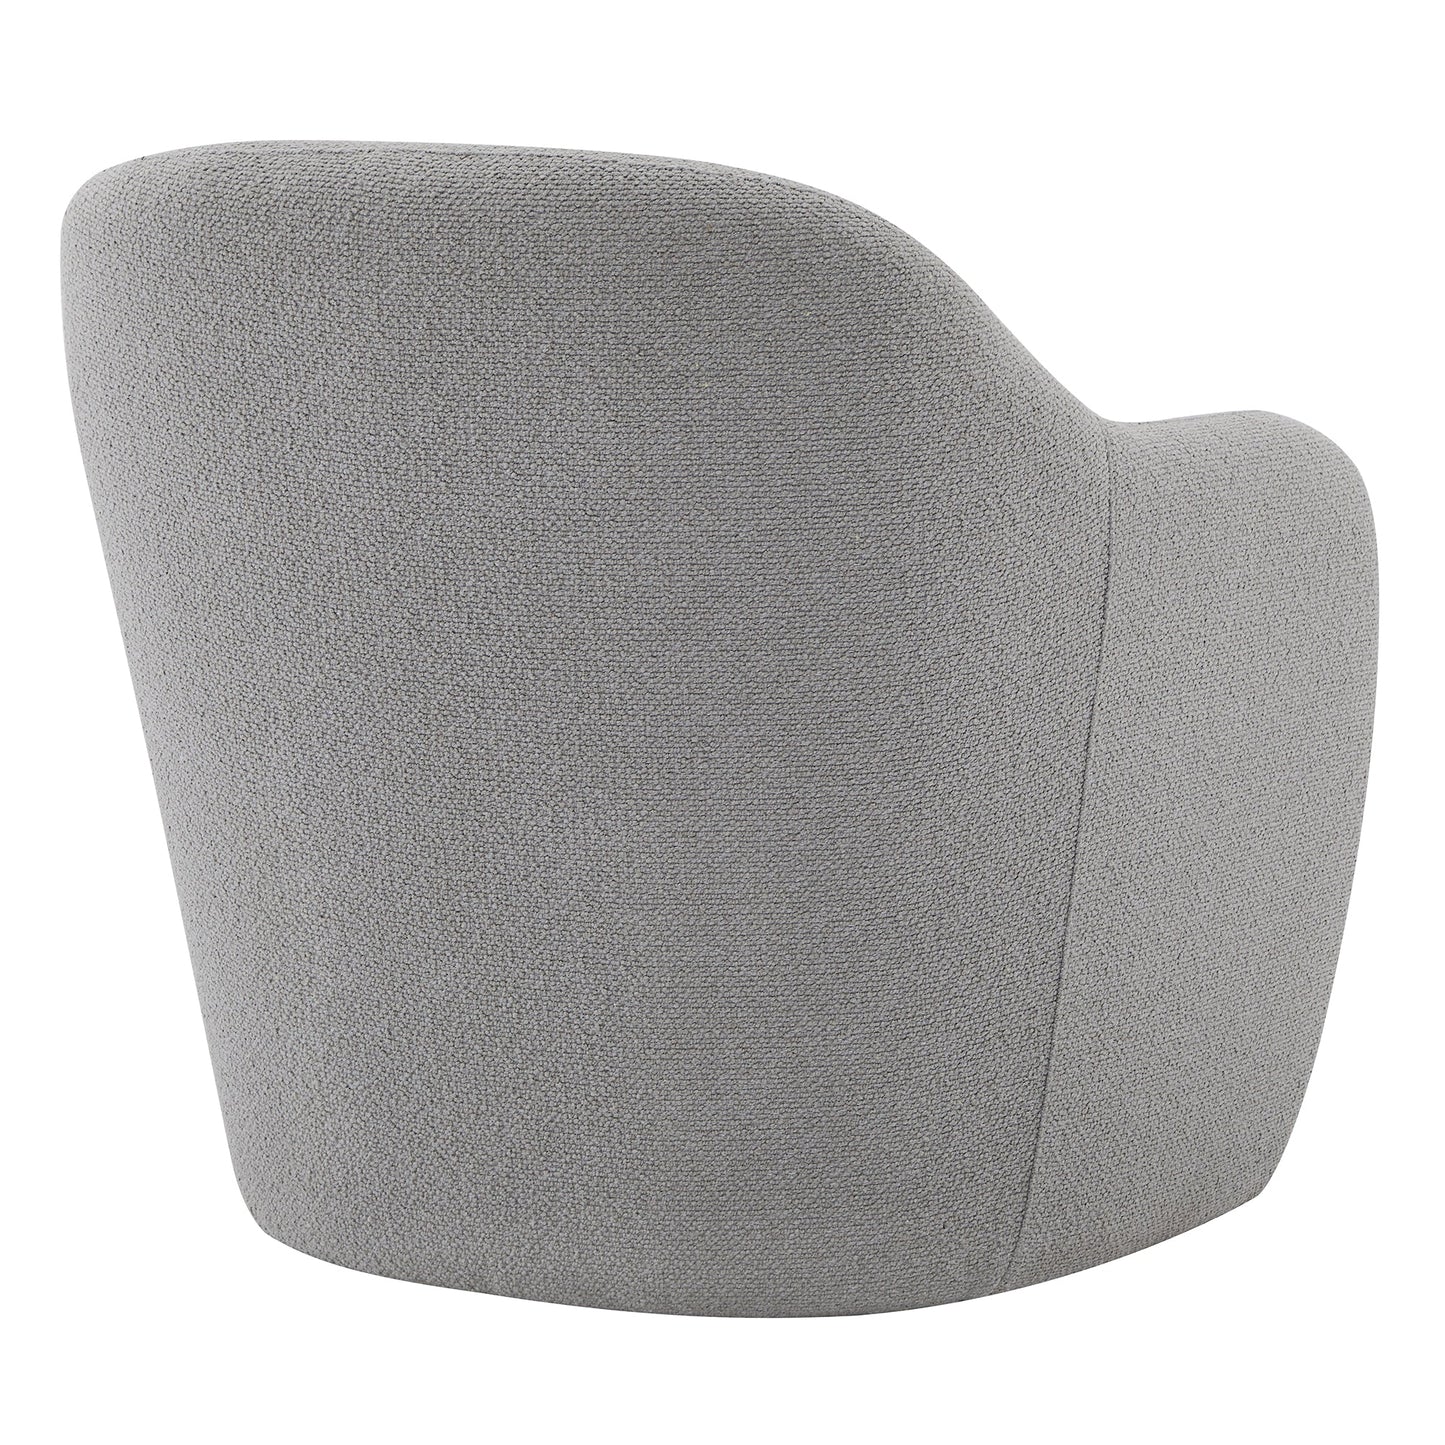 CHITA LIVING-Doris Modern Boucle Accent Chair-Accent Chair-Performance Fabric-Gray-